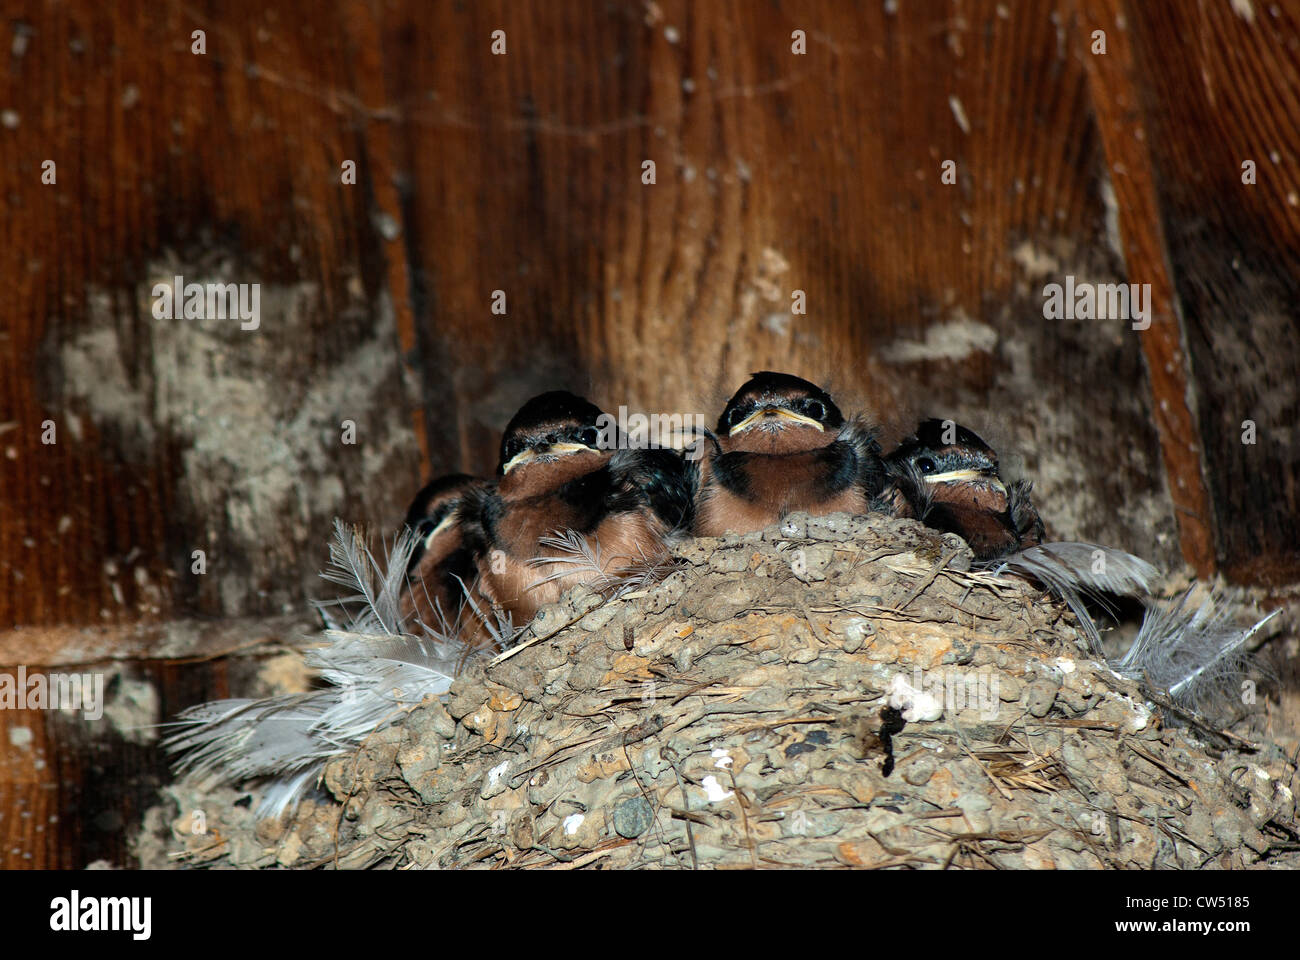 Four baby swallow chicks waiting for food. Stock Photo